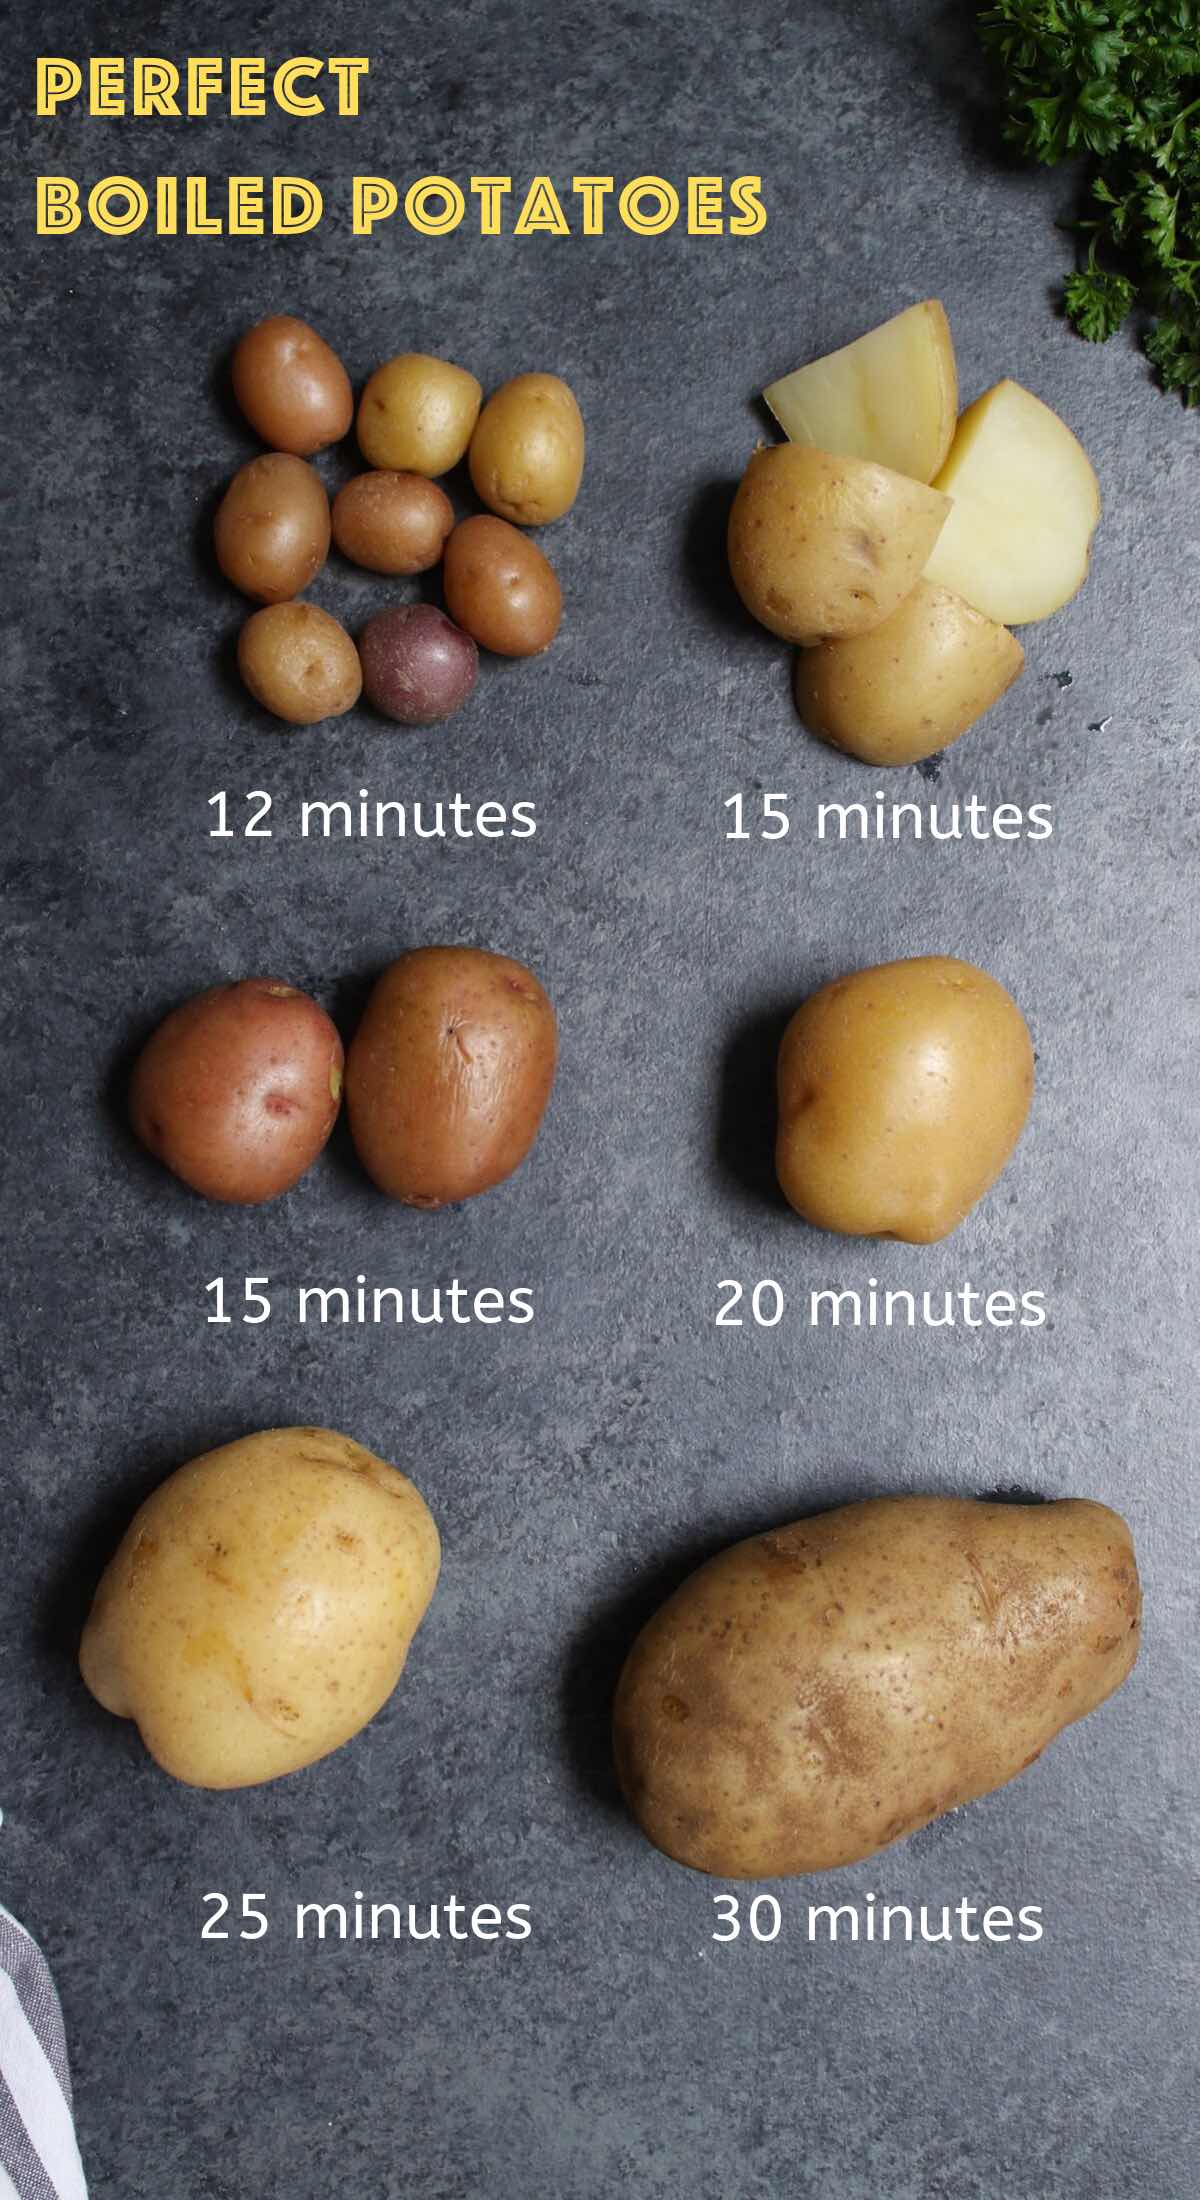 Comparison of different boiled potatoes with their corresponding boiling times to make it easy to determine how long to boil potatoes.